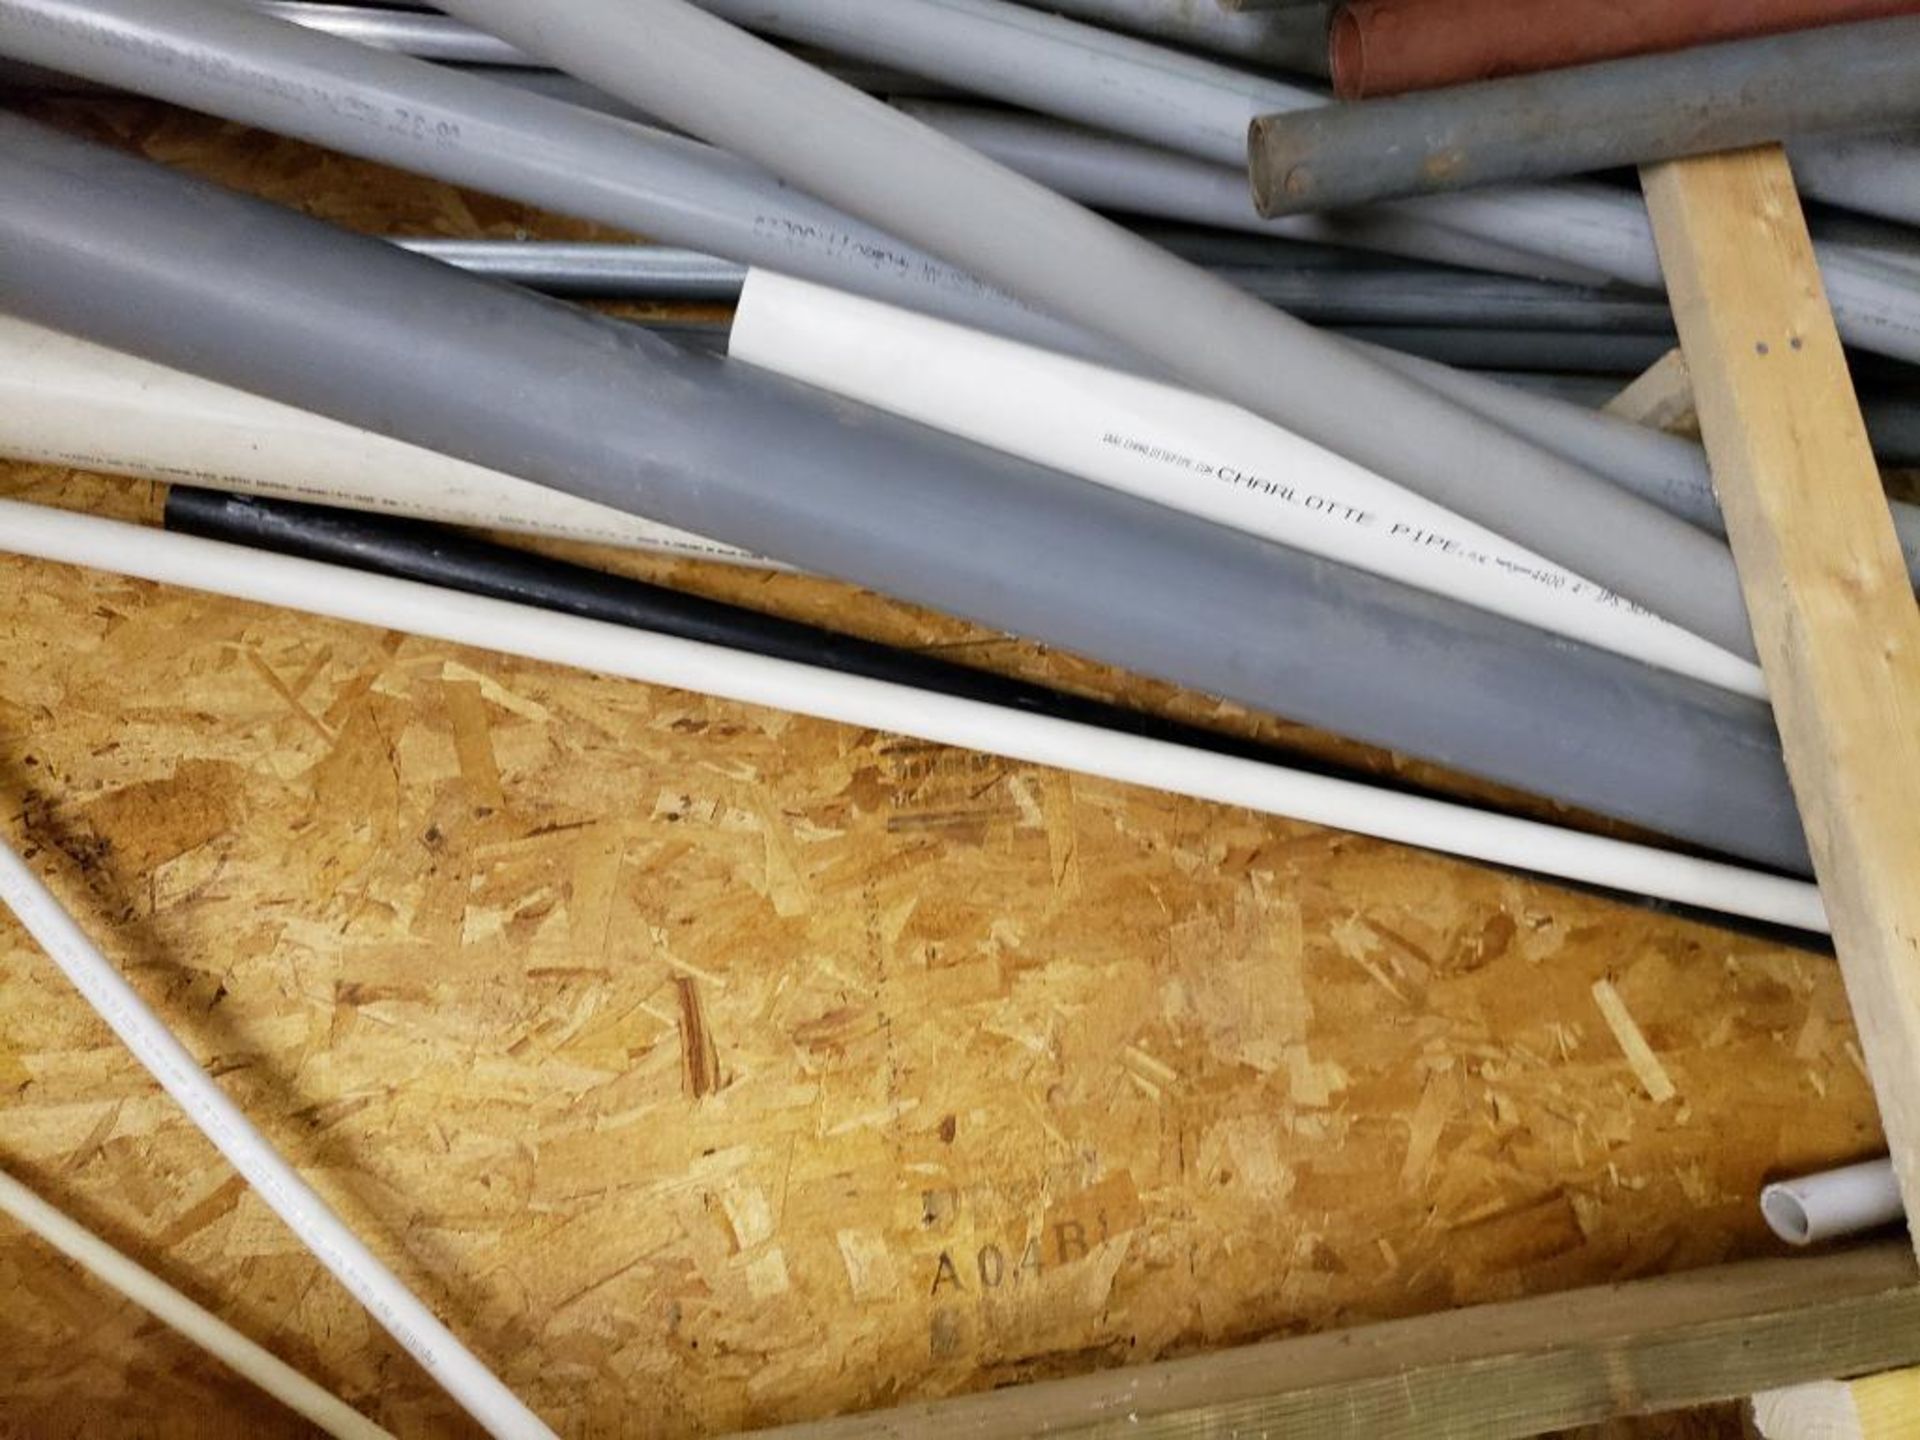 Large assortment of pvc tubing, fittings, pipes, etc. - Image 6 of 6